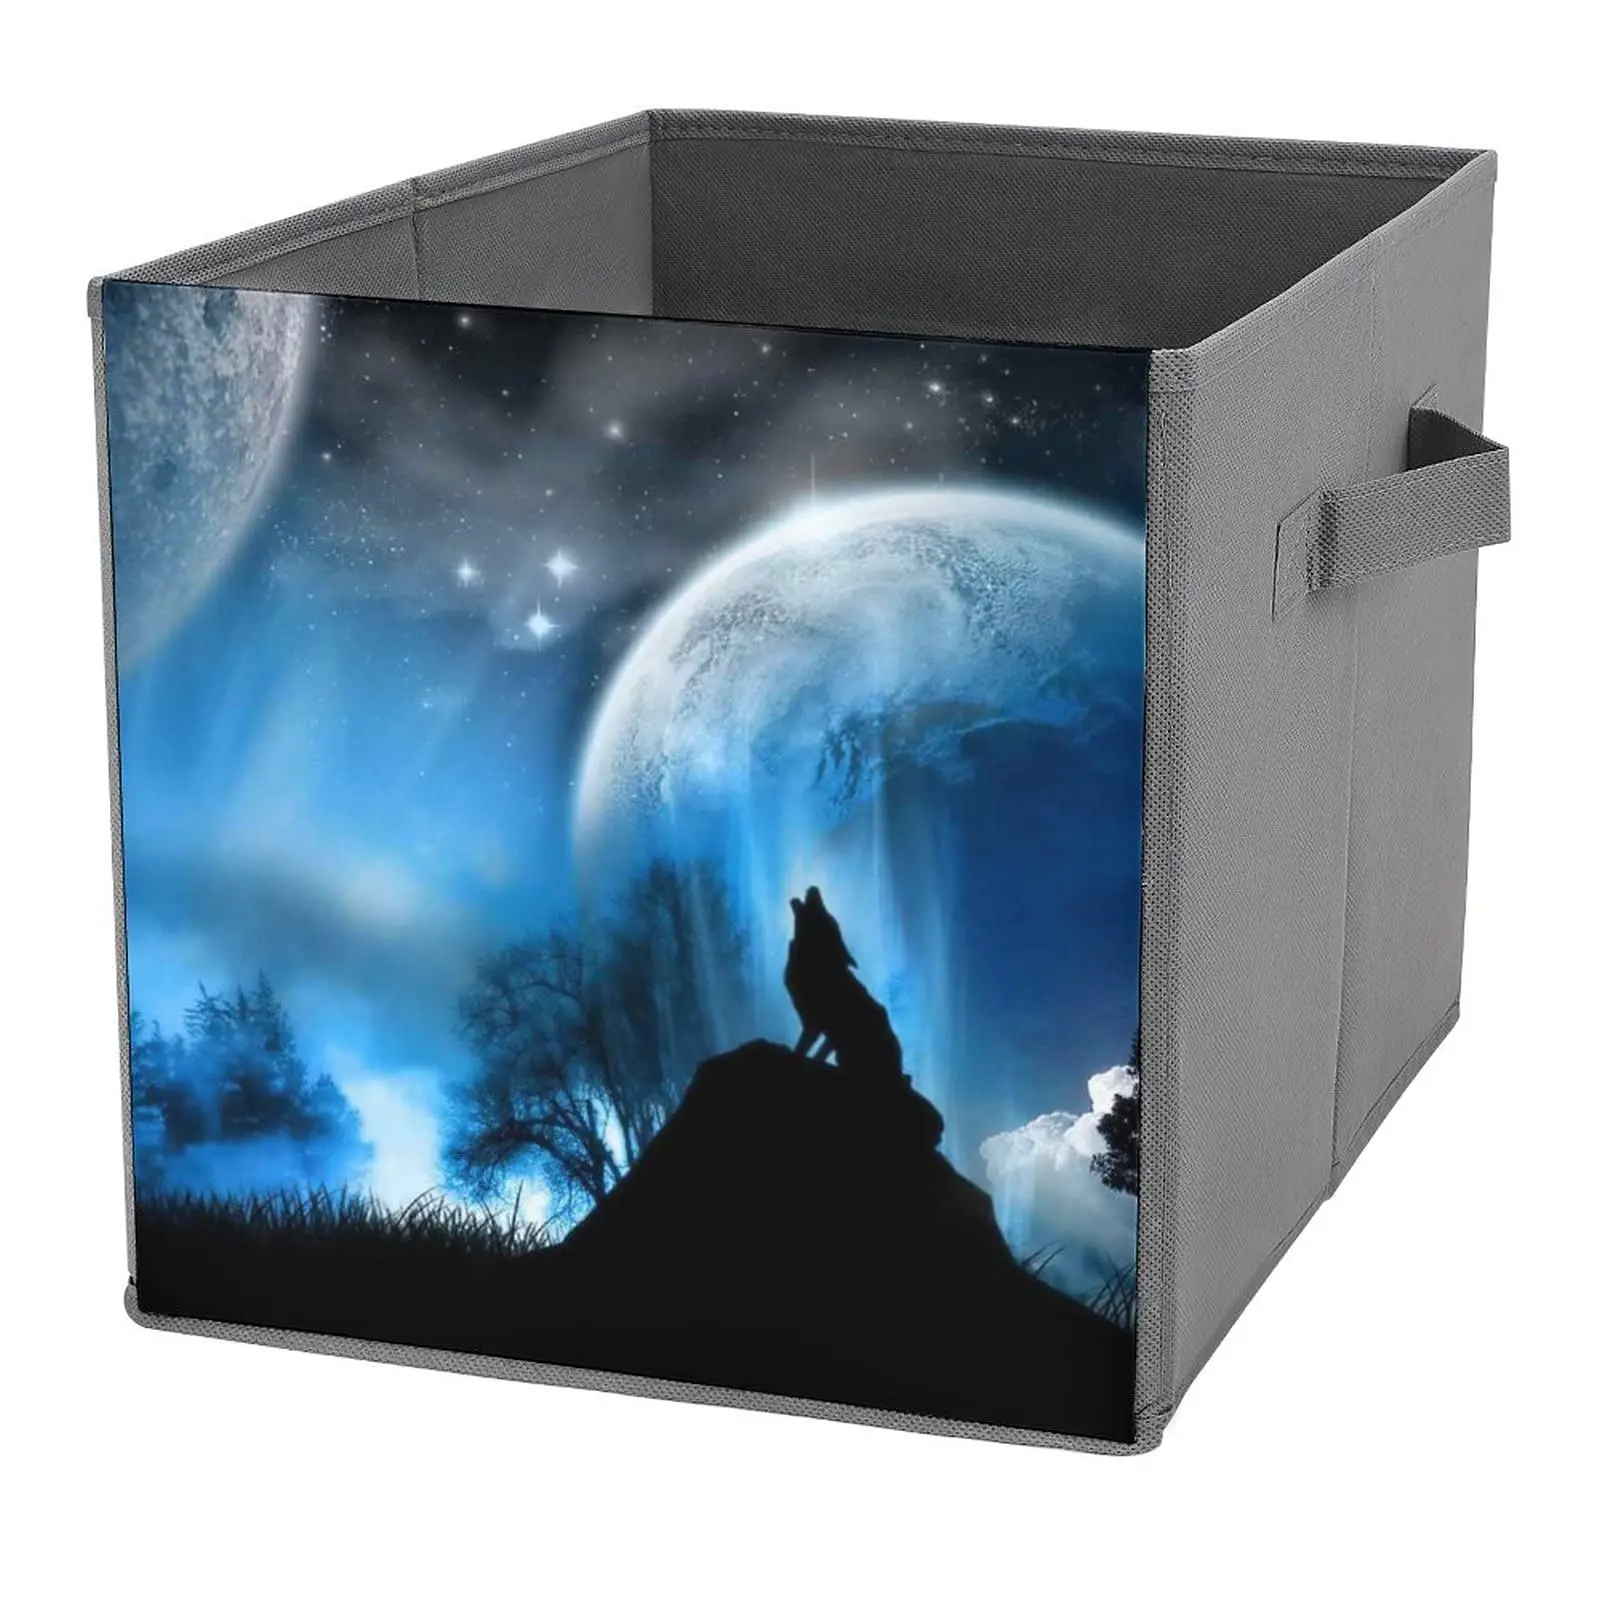 

Howling Wolf Folding Storage Bins Collapsible Starry Moon Large Capacity Toy Clothes Sundries Storage Box Organizer Laundry Bin